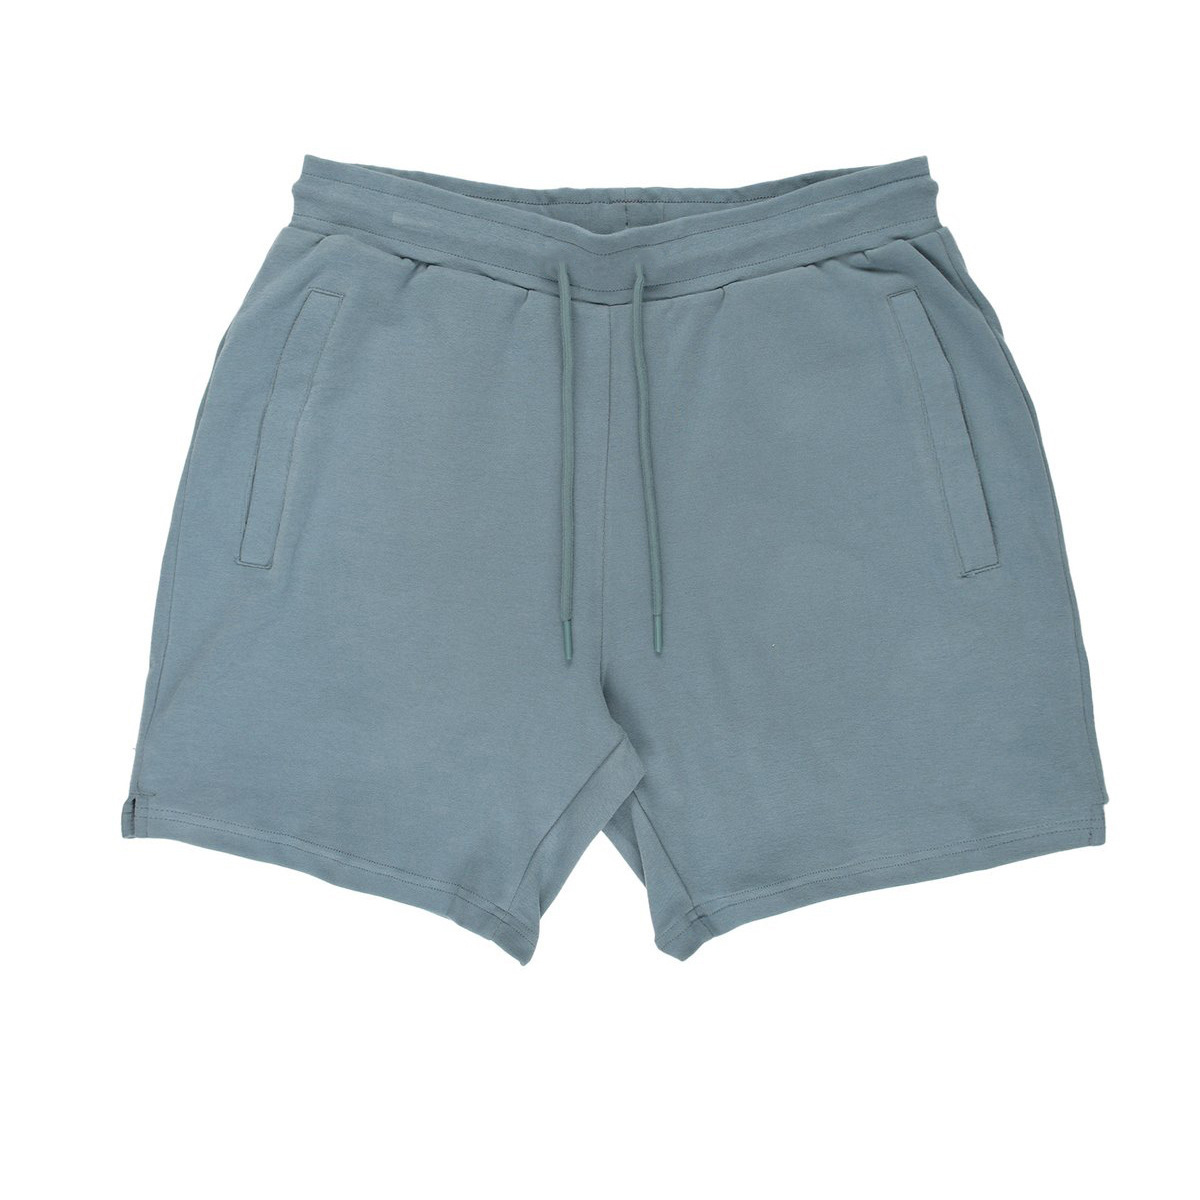 Men's Athletic Fitness Shorts for Running and Casual Wear